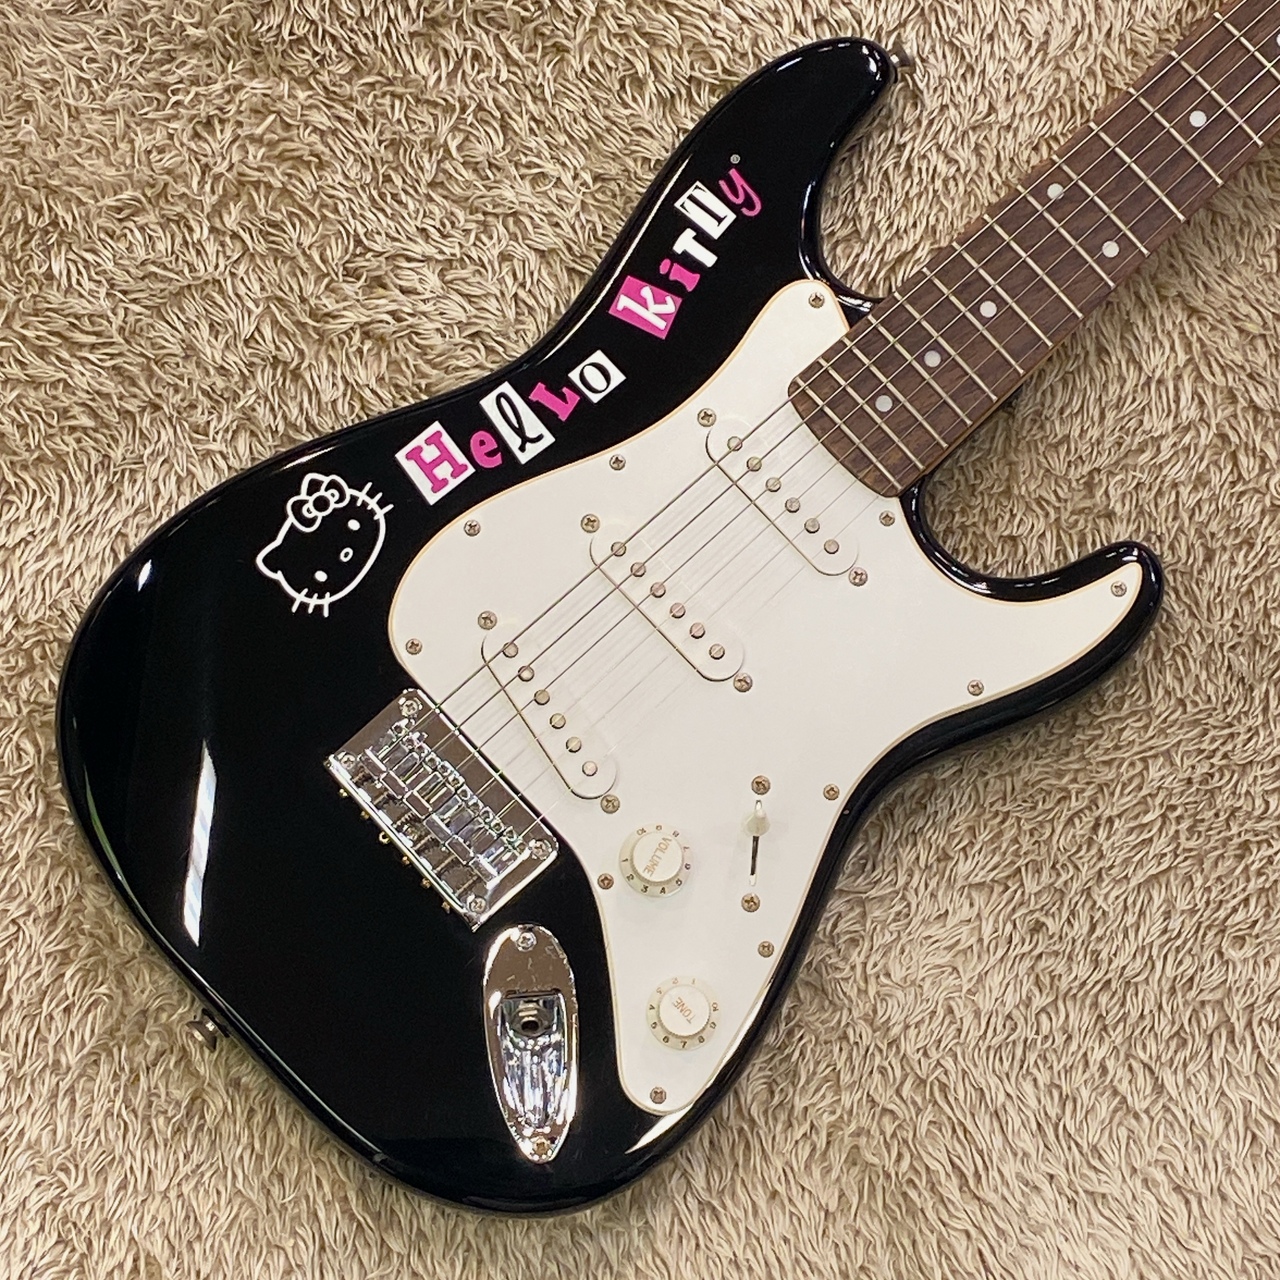 Squier by Fender Hello Kitty Strato